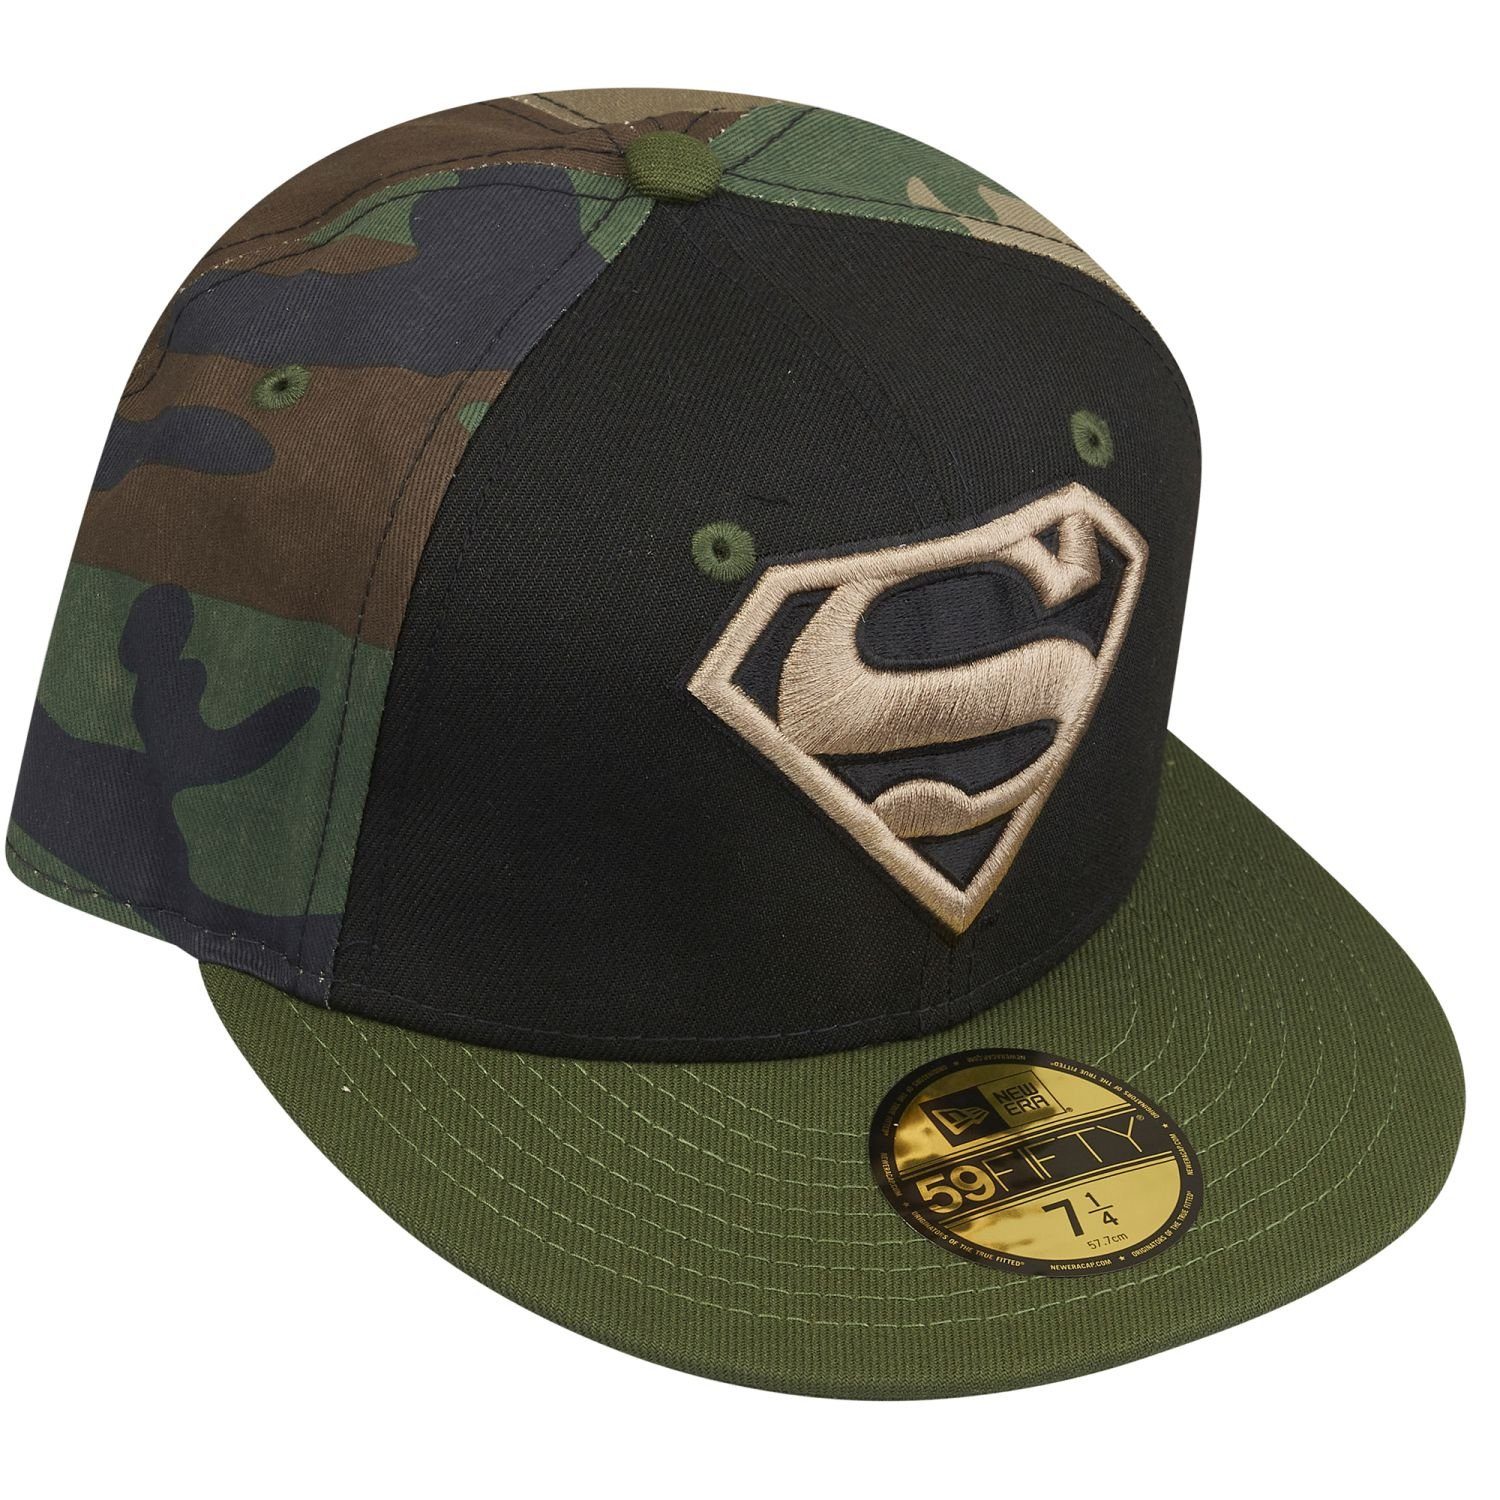 Fitted Era Cap 59Fifty SUPERMAN New woodland